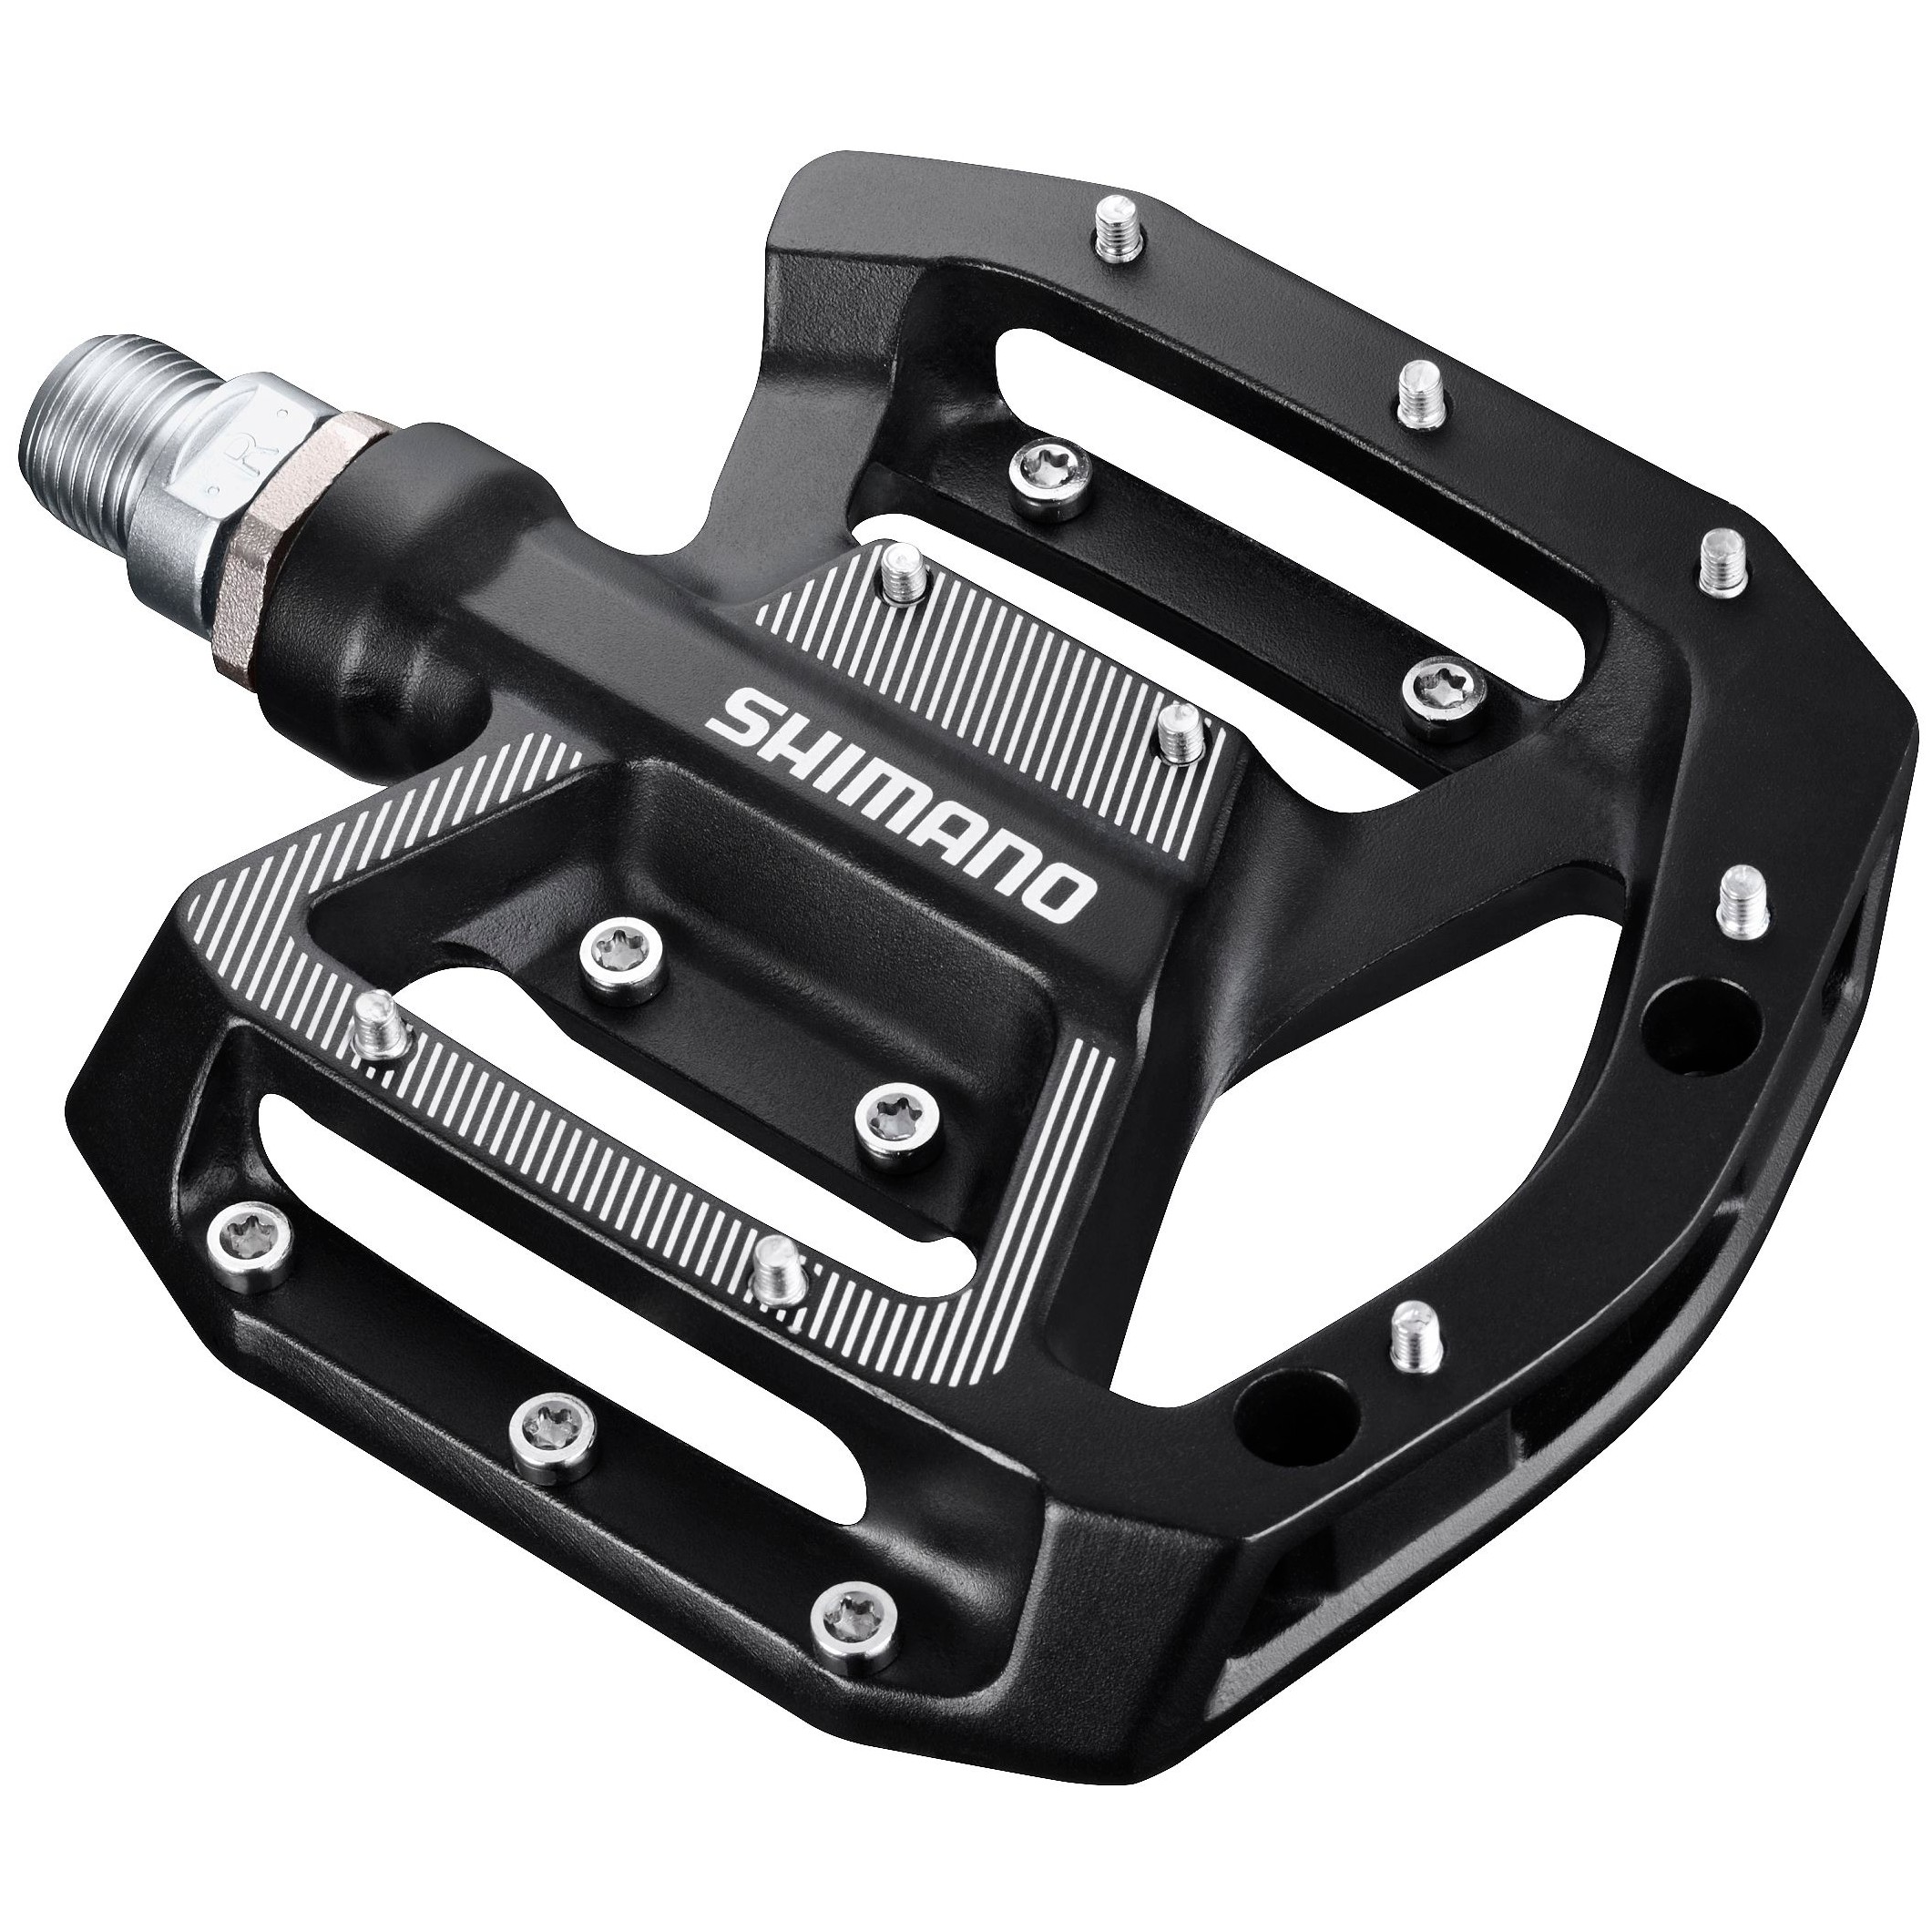 Shimano pedals GR500